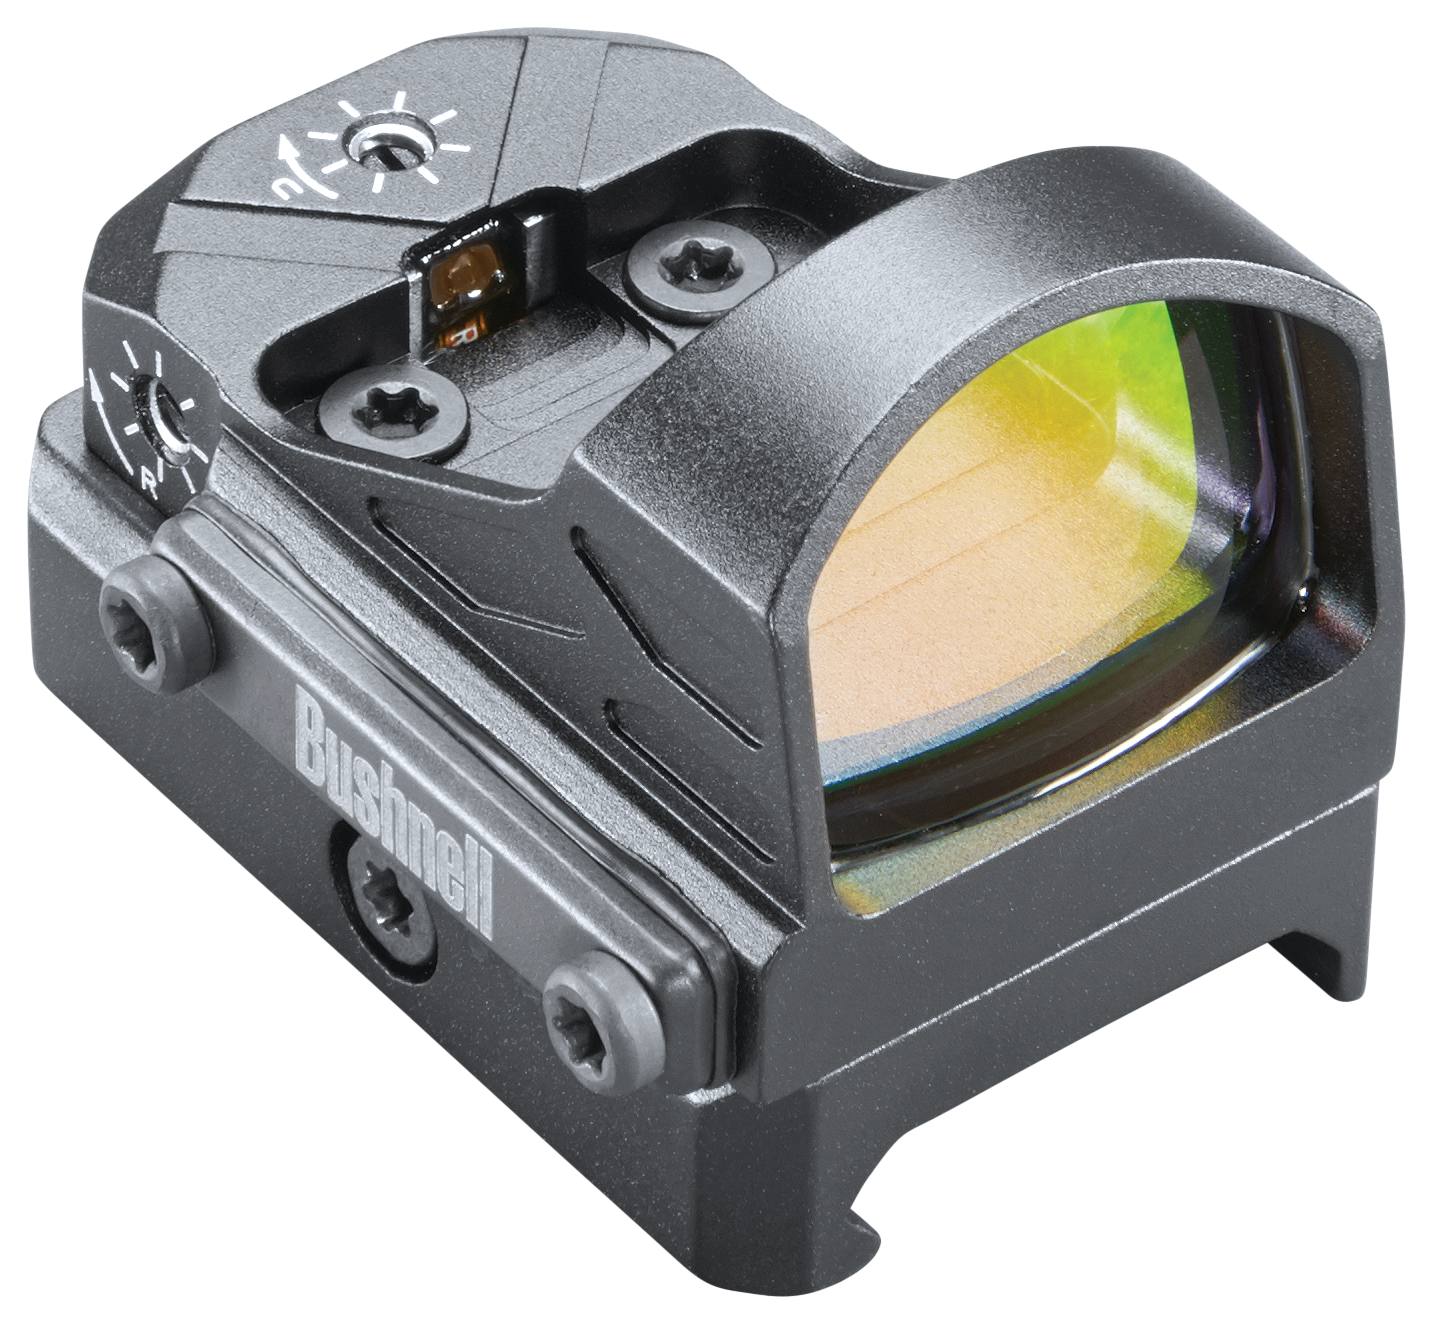 Buy Advance Sight and More |